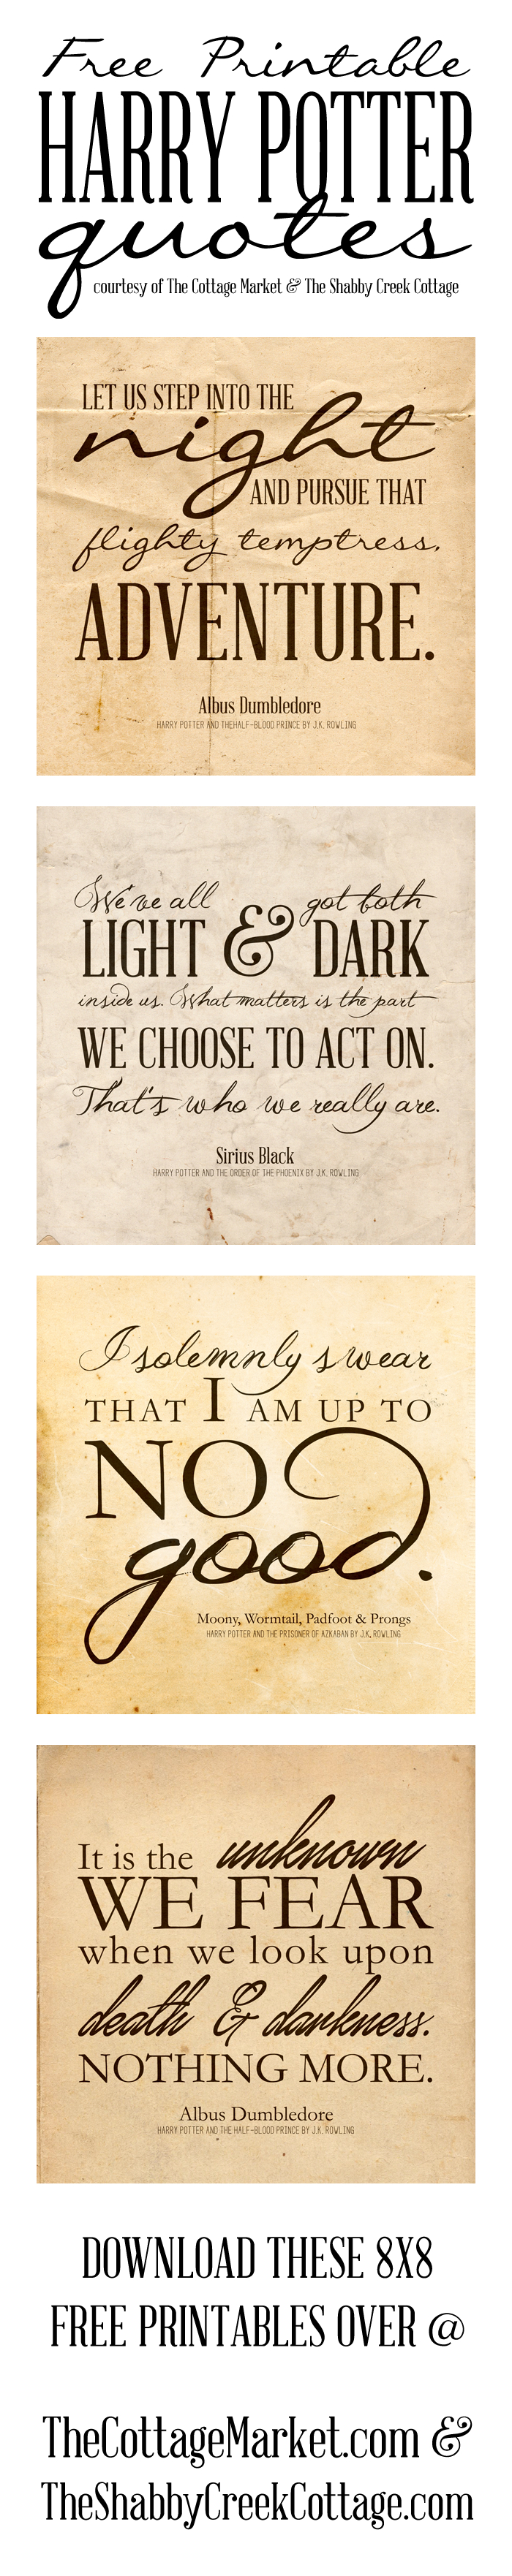 Free Harry Potter Quotes Printables | Pinterest | Harry Potter, Free - Free Printable Harry Potter Posters